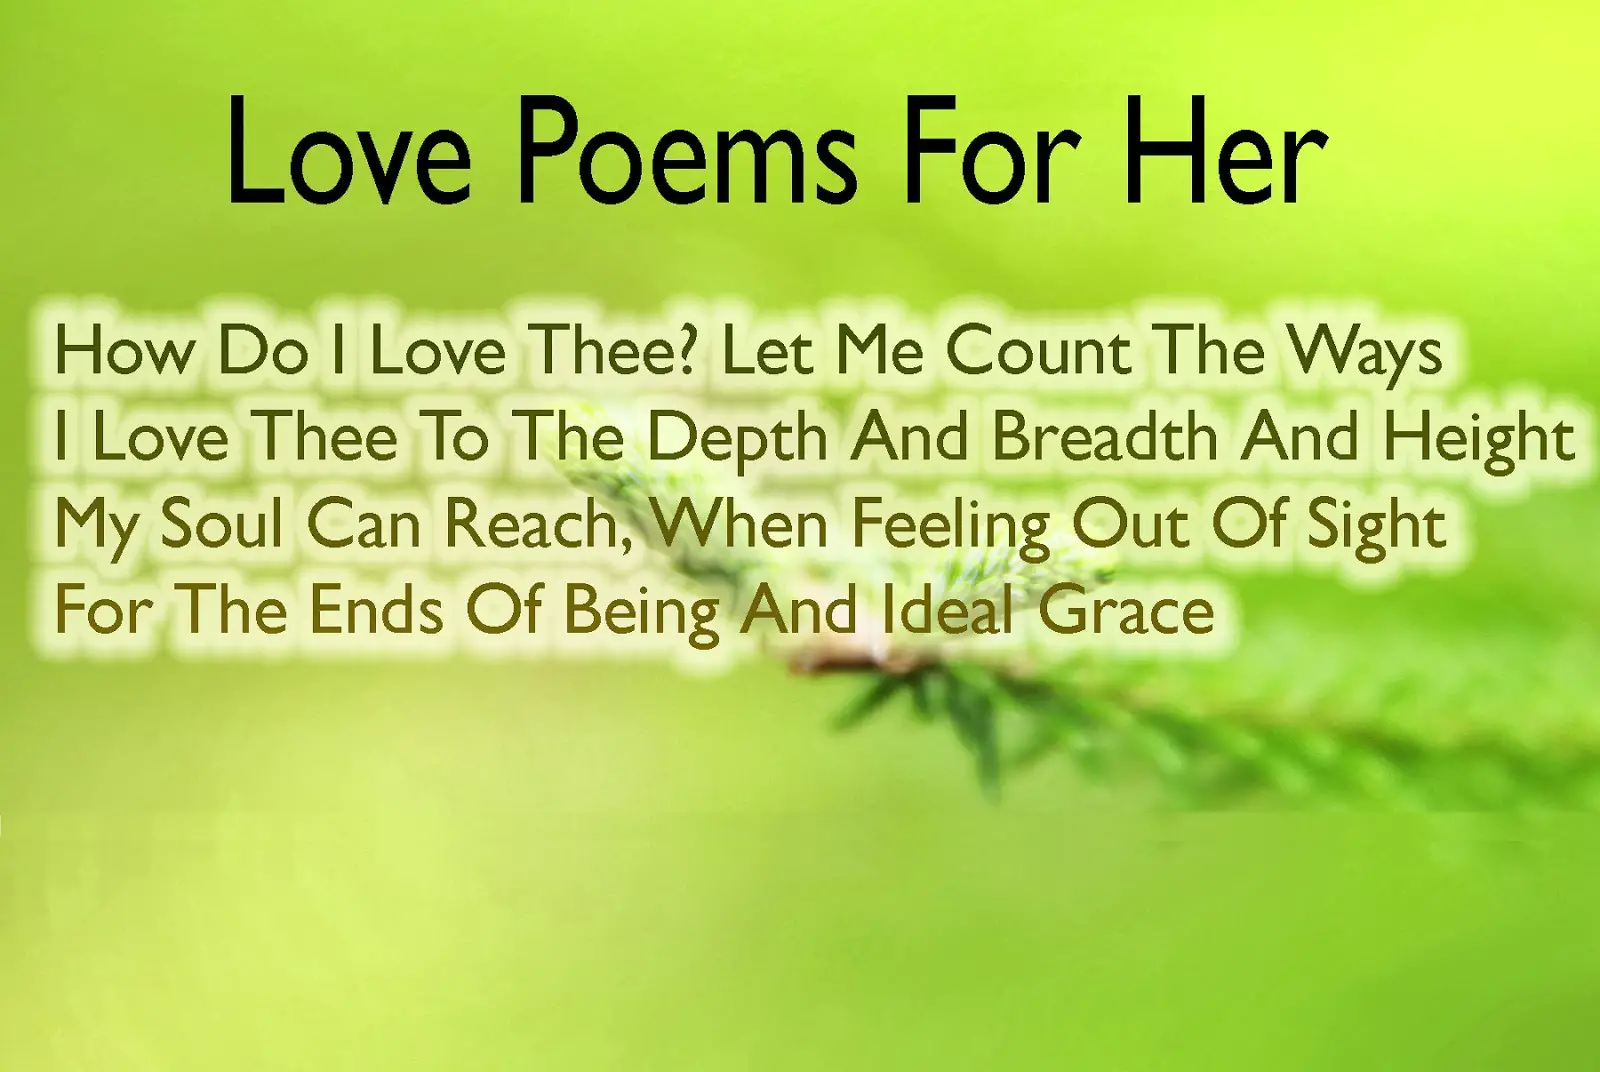 Short poems for your wife